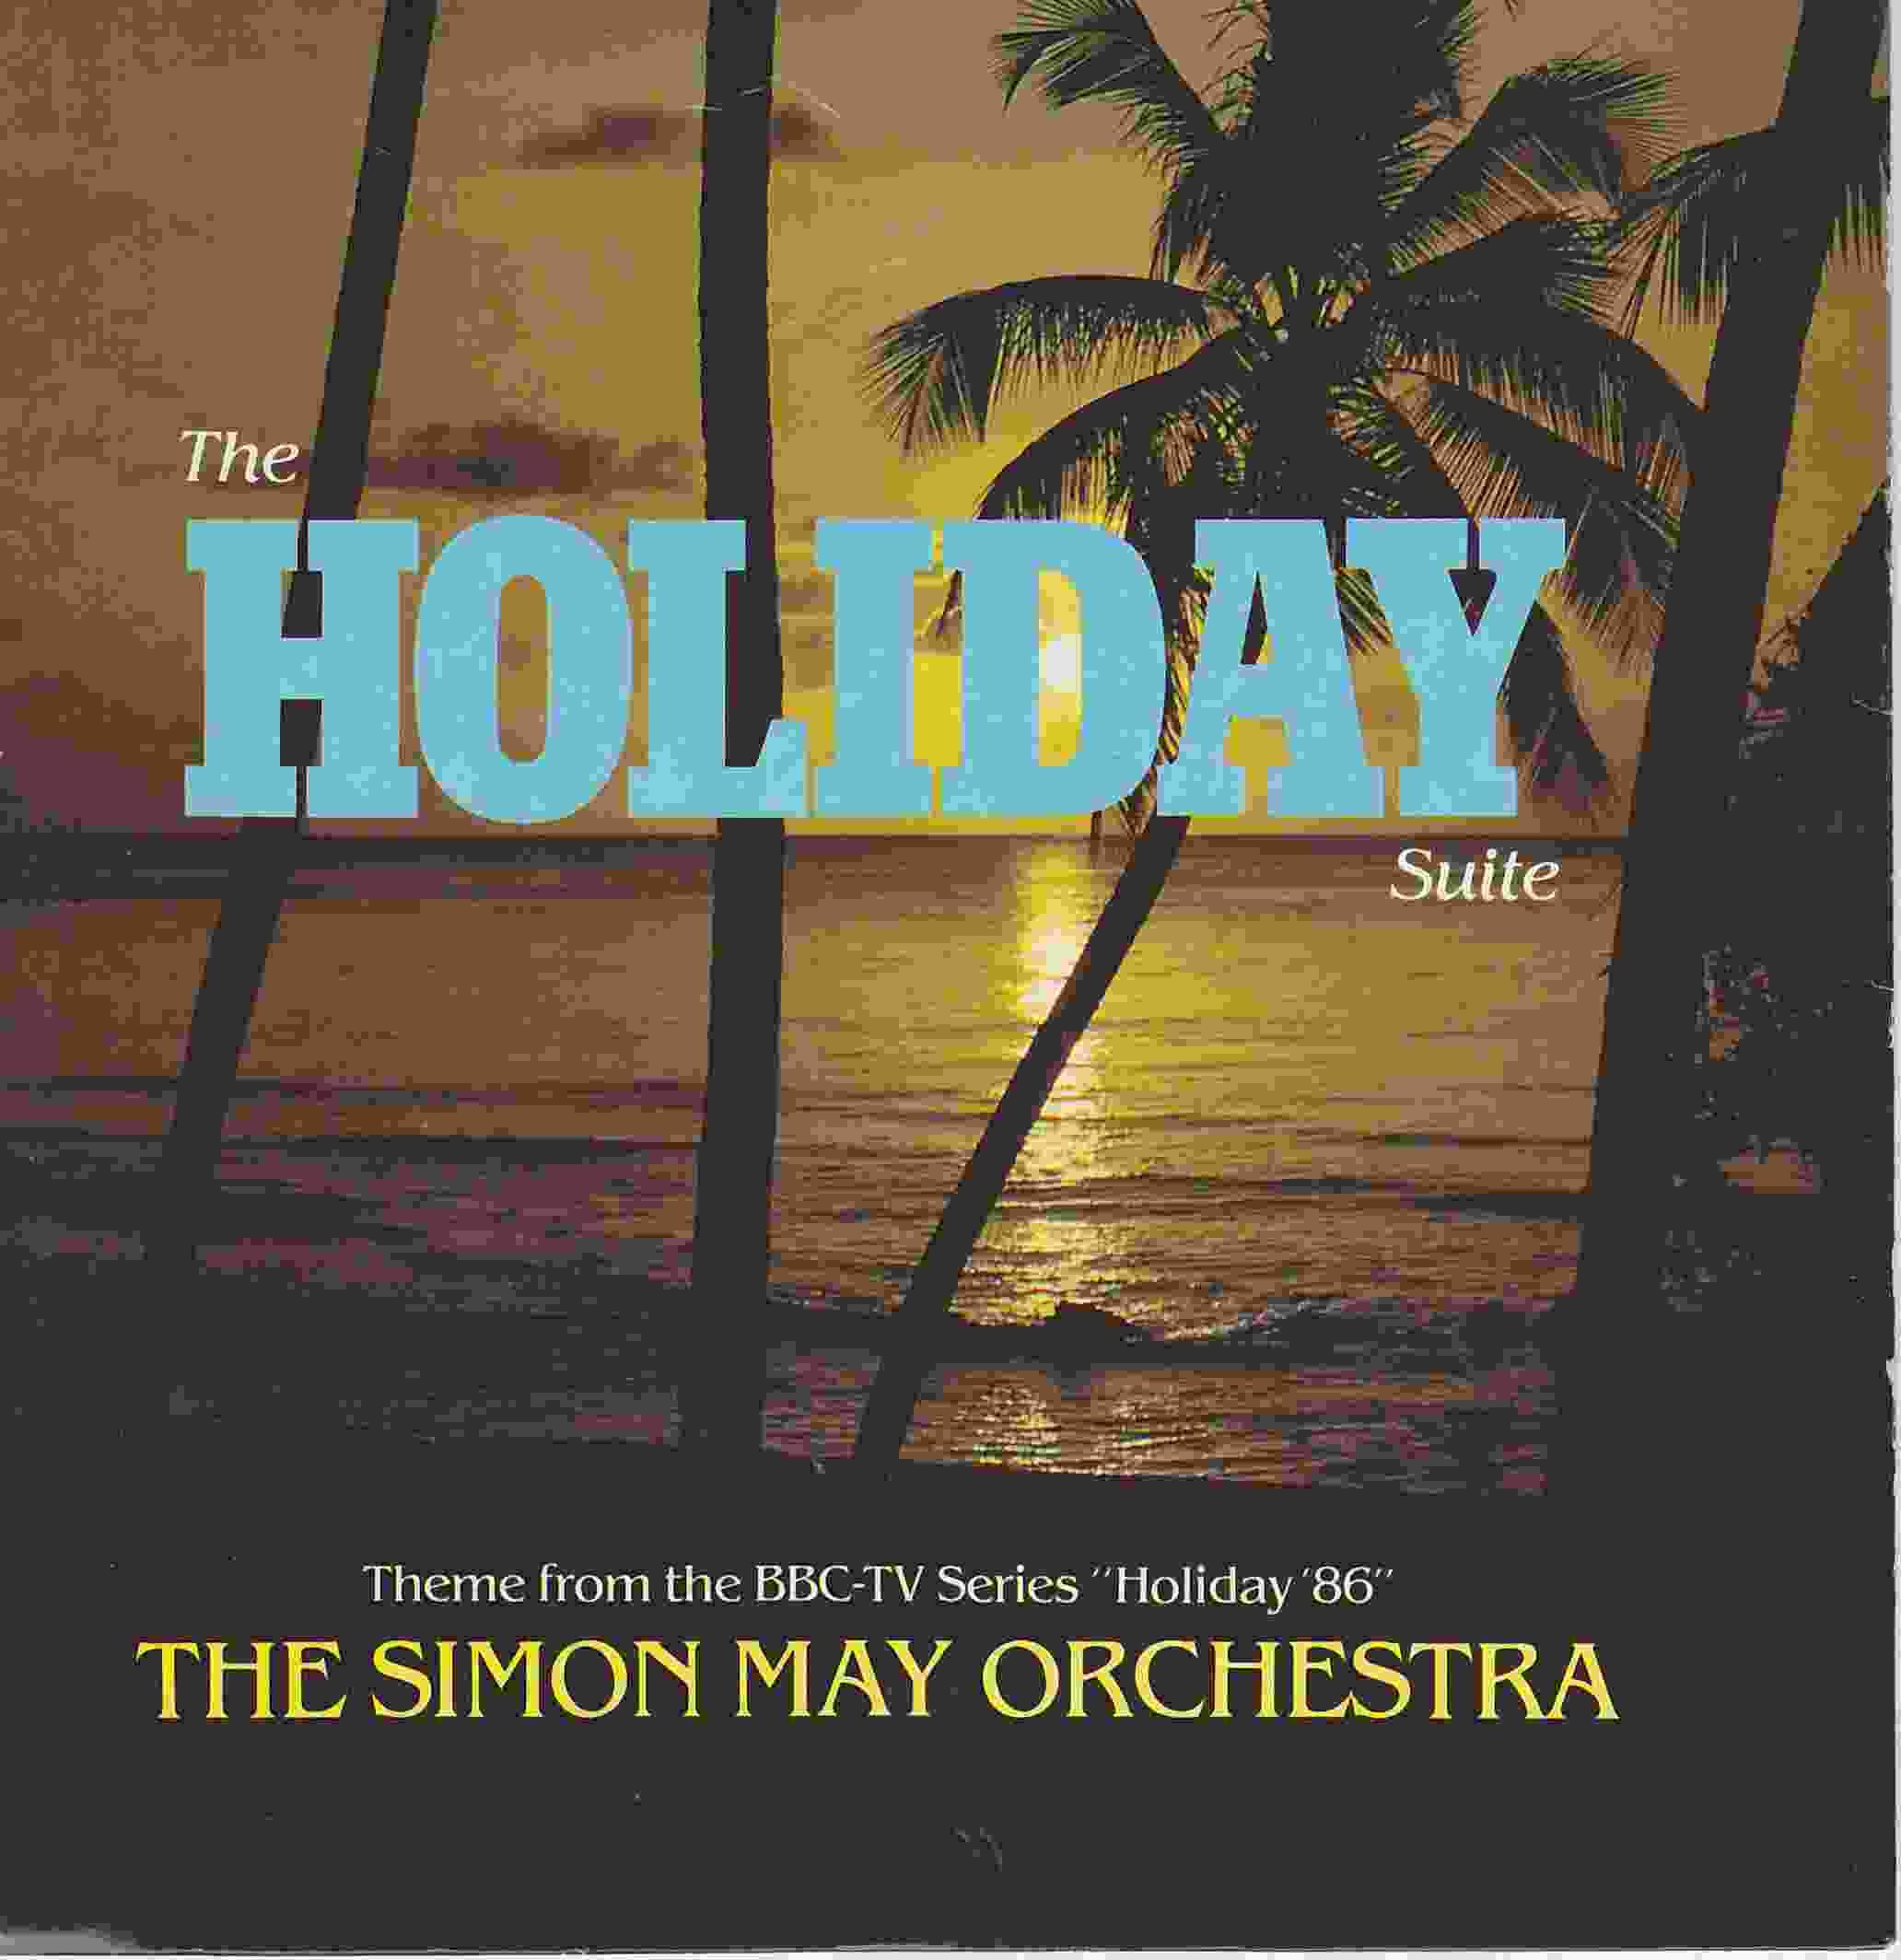 Picture of The holiday suite (Holiday '86) by artist The Simon May Orchestra from the BBC singles - Records and Tapes library